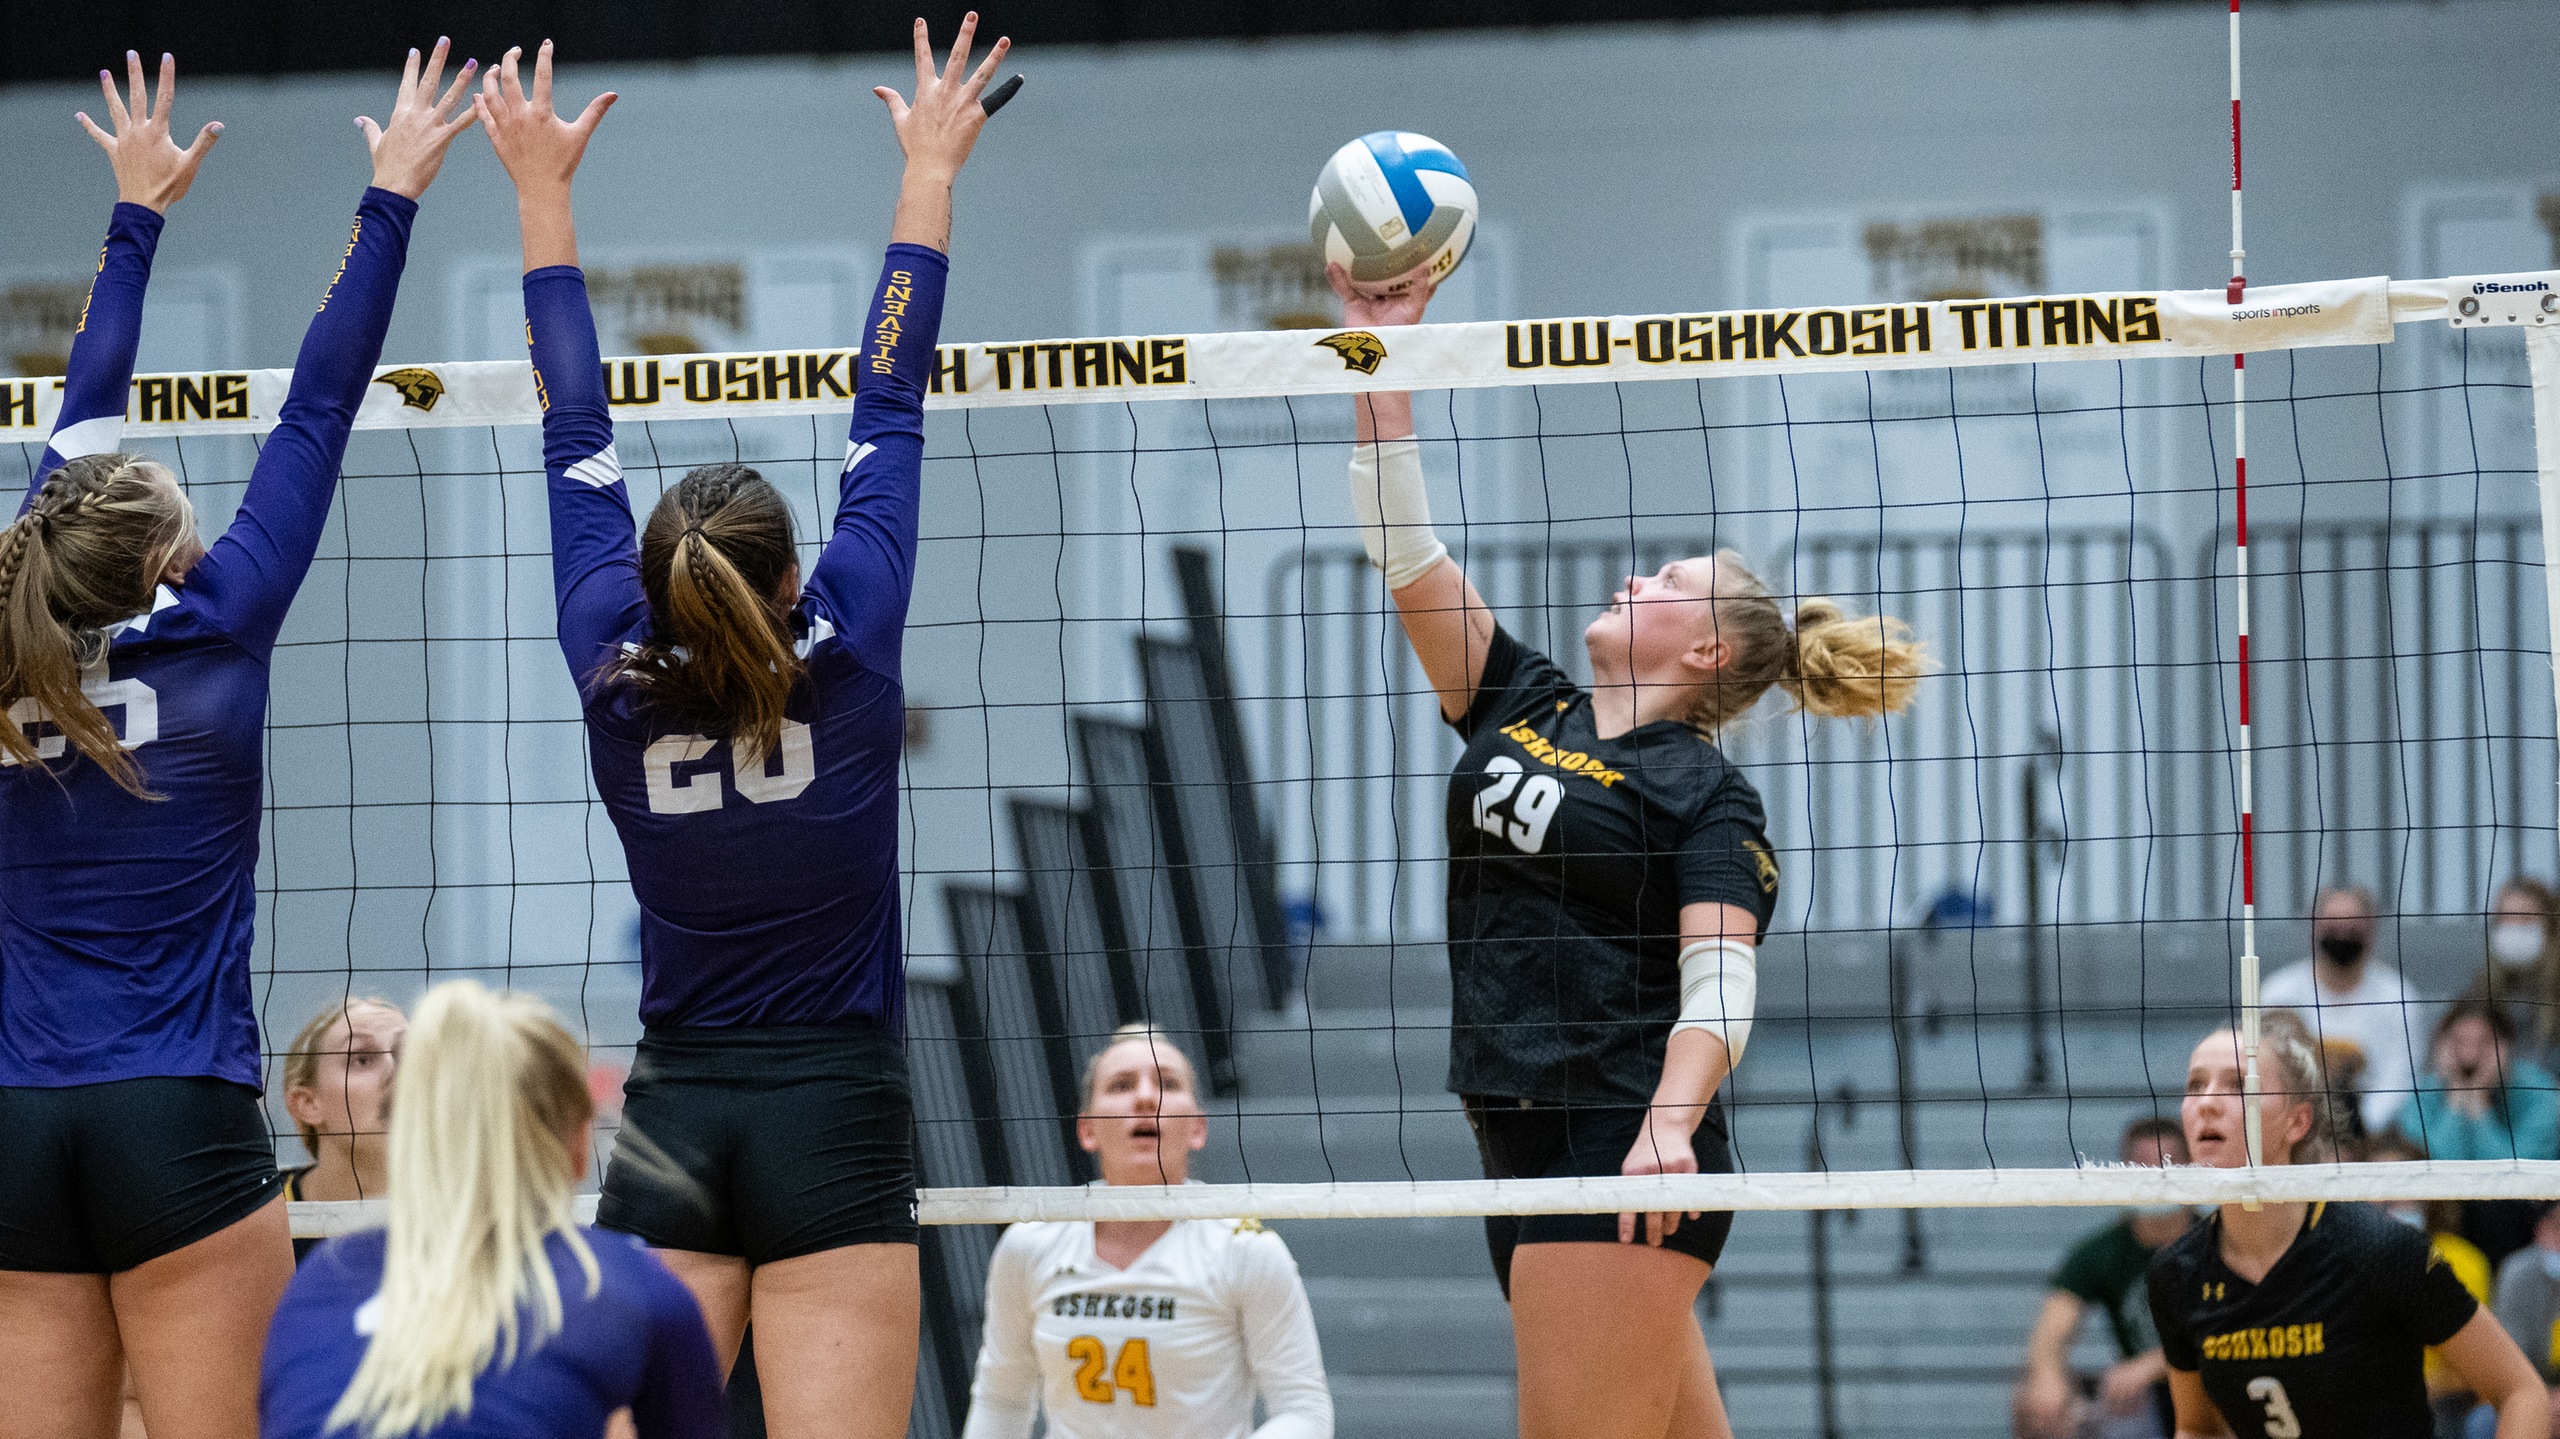 Joslyn Wolff had 11 kills and three digs during the Titans' upset of nationally ranked UW-Stevens Point.